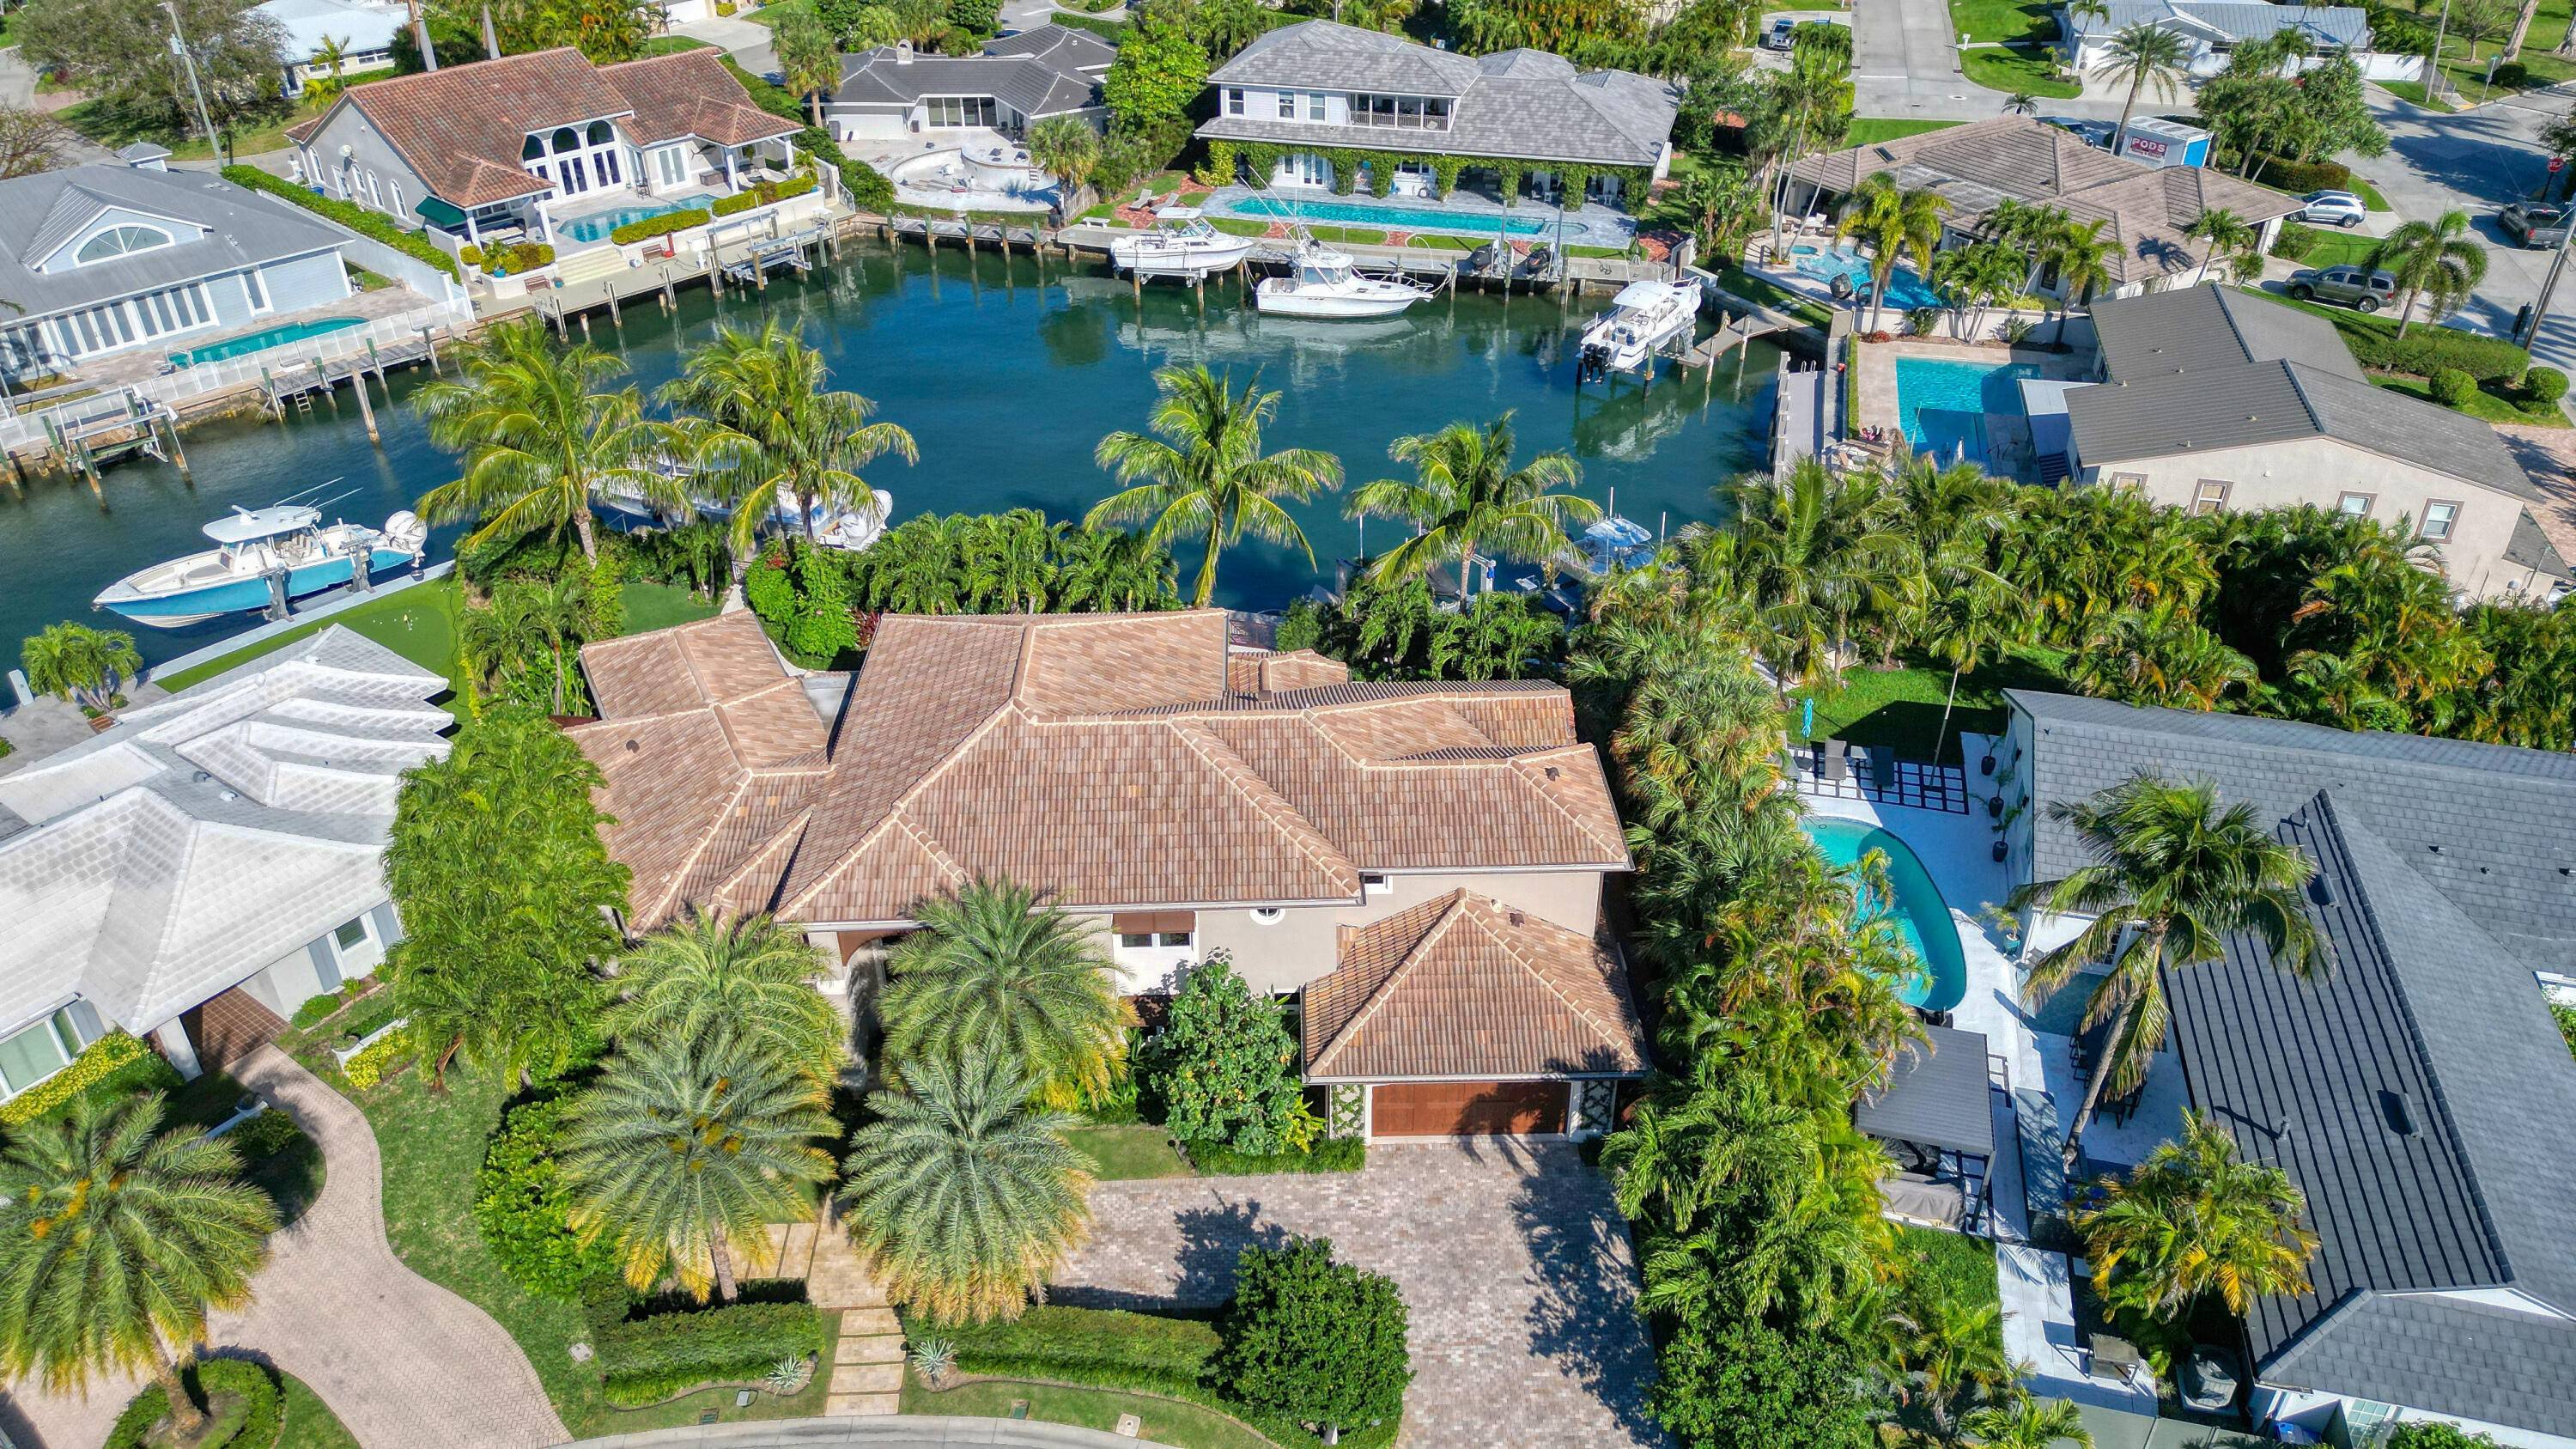 Experience unmatched elegance and modern sophistication at this waterfront estate fully renovated in 2019.